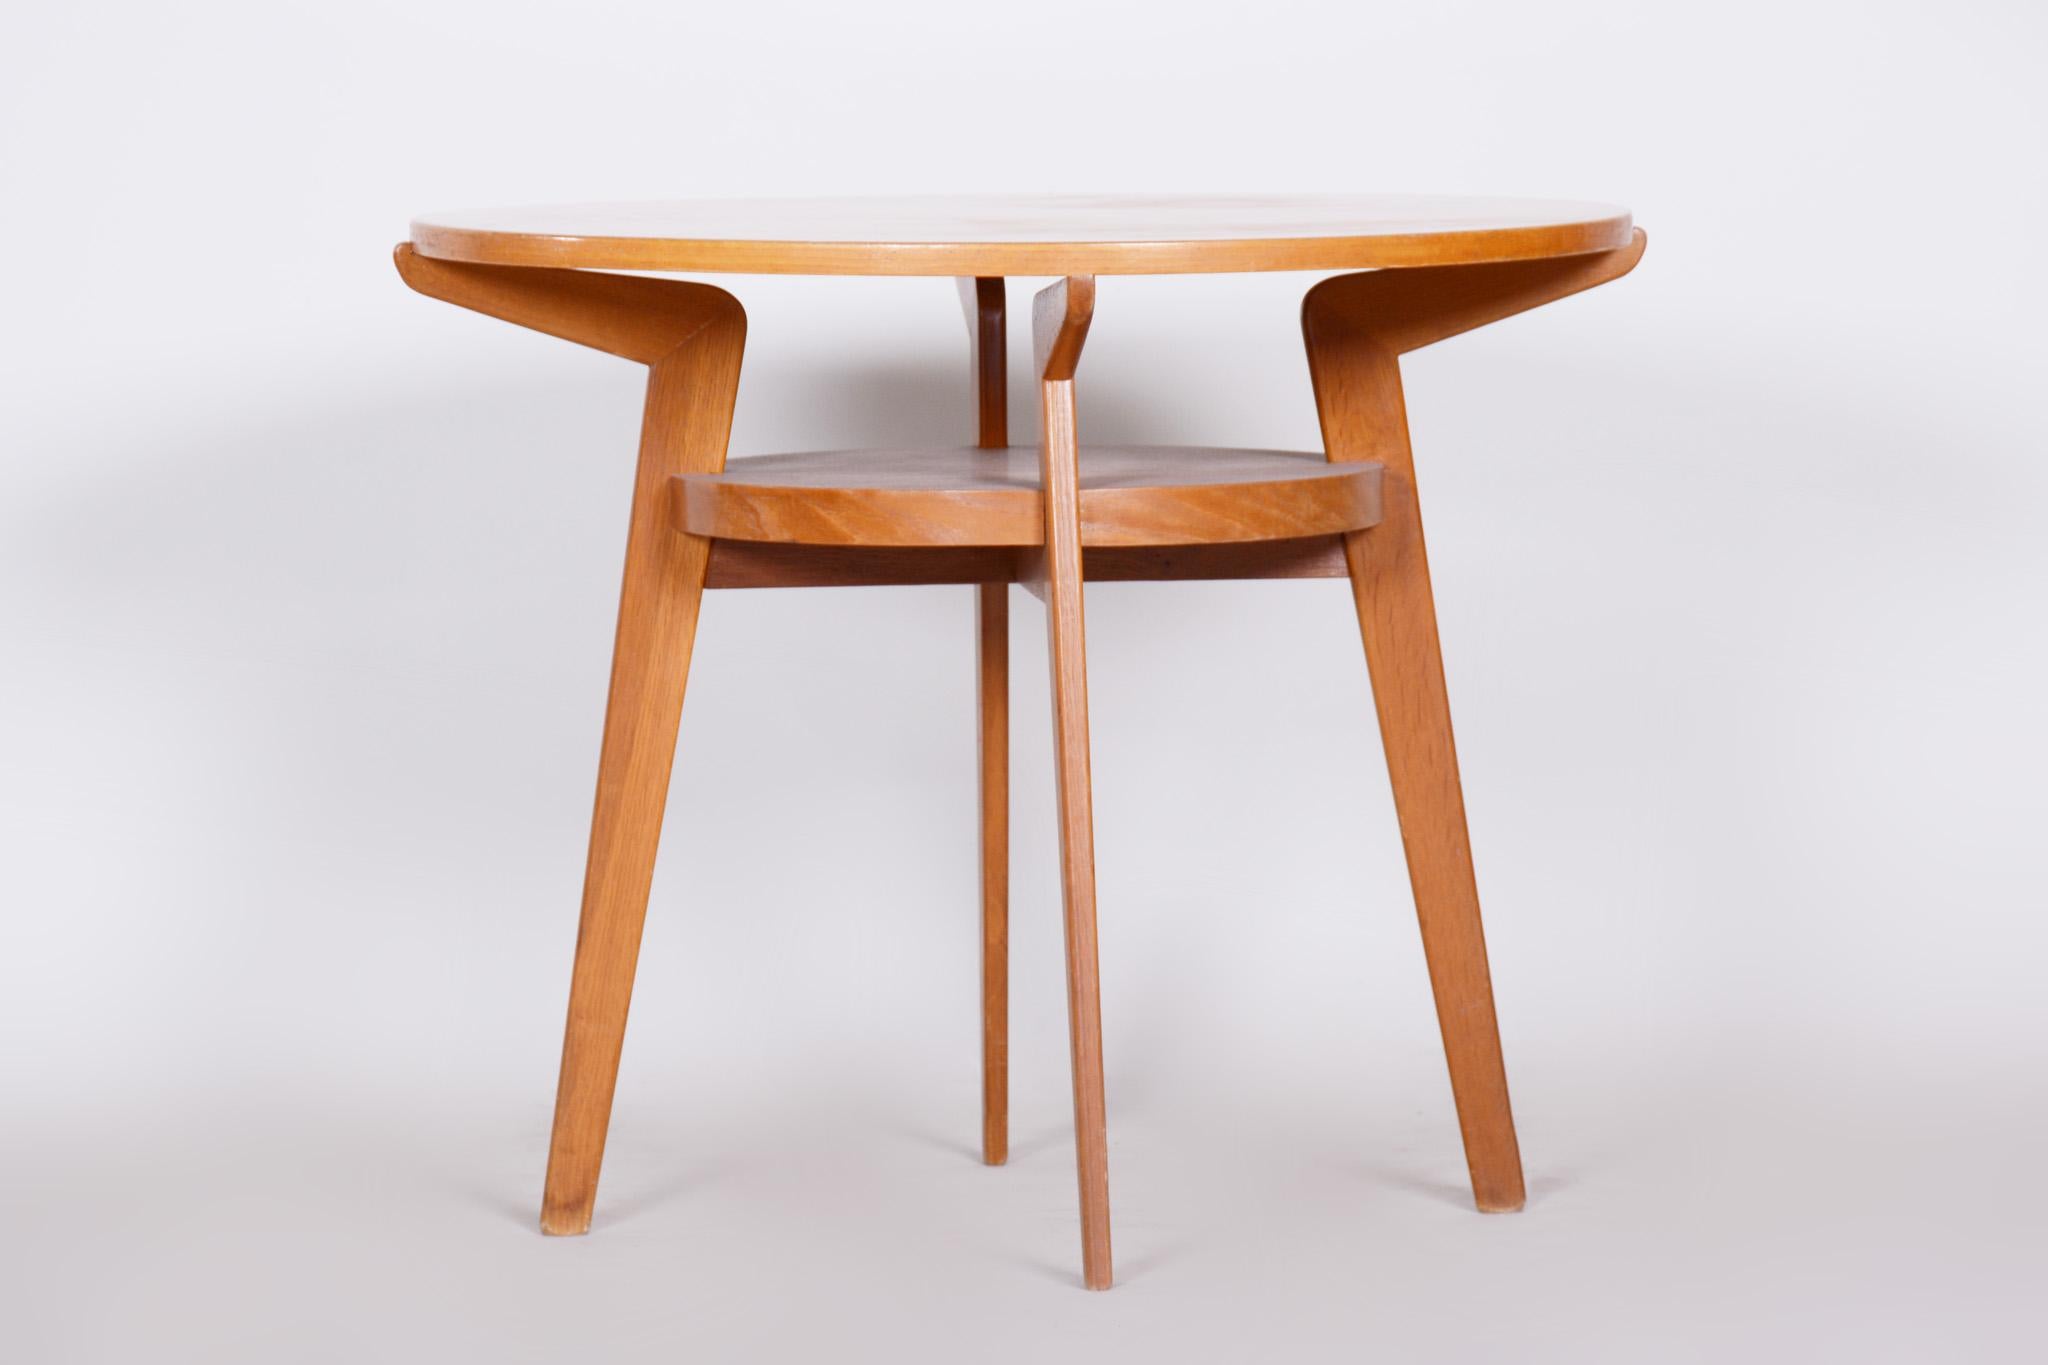 Small Mid Century Table, Made in Czechia, 1950s, Original Condition, Oak In Good Condition For Sale In Horomerice, CZ